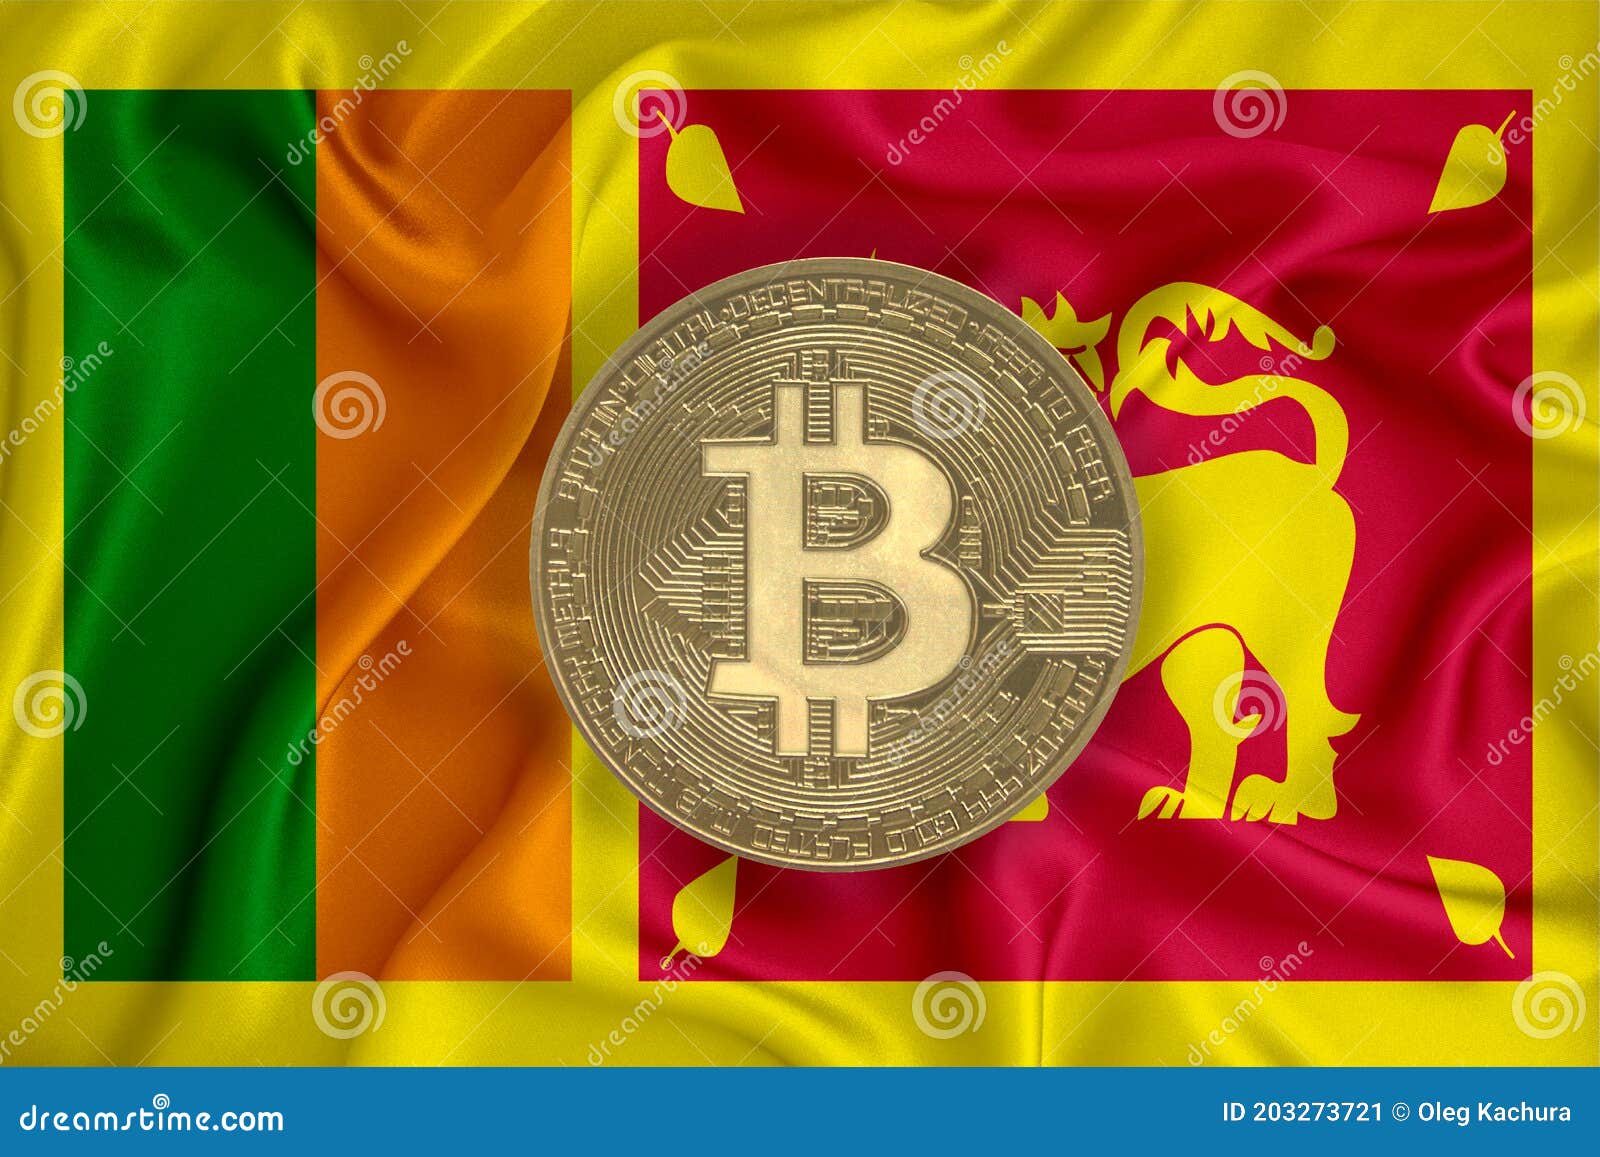 Bitcoins in sri lanka best trading platforms for cryptocurrencies